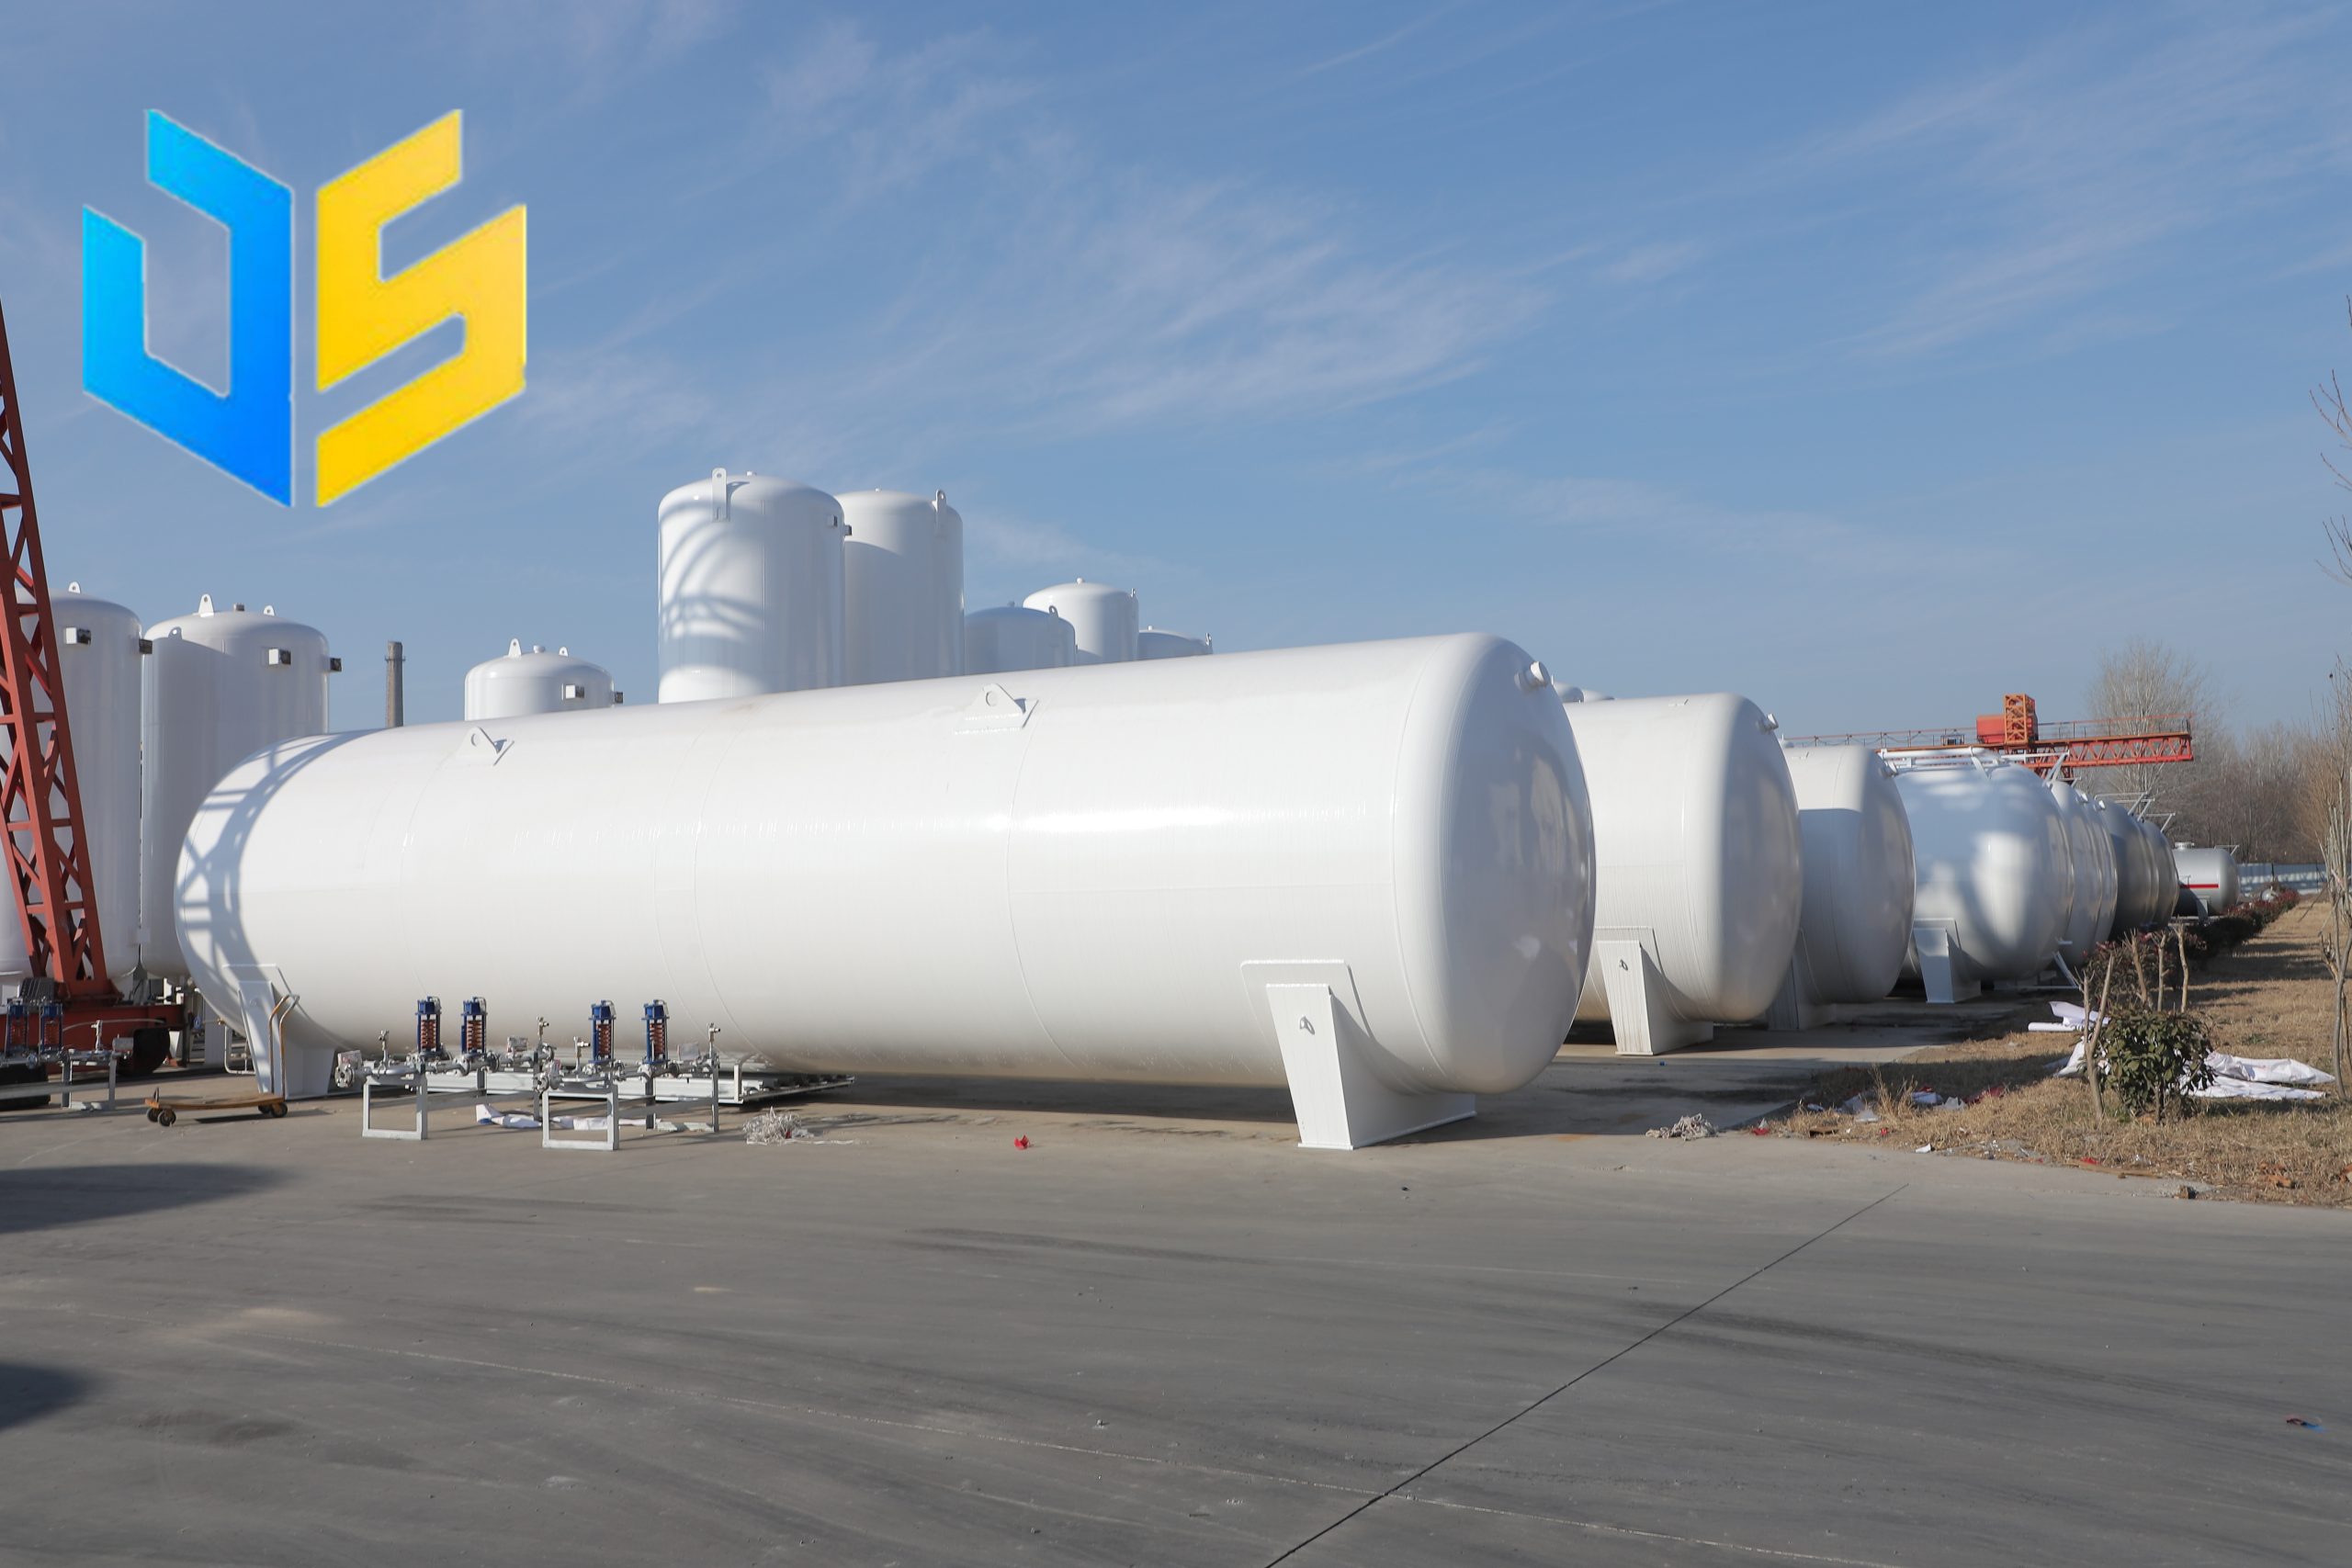 All LPG storage tanks are automatically welded